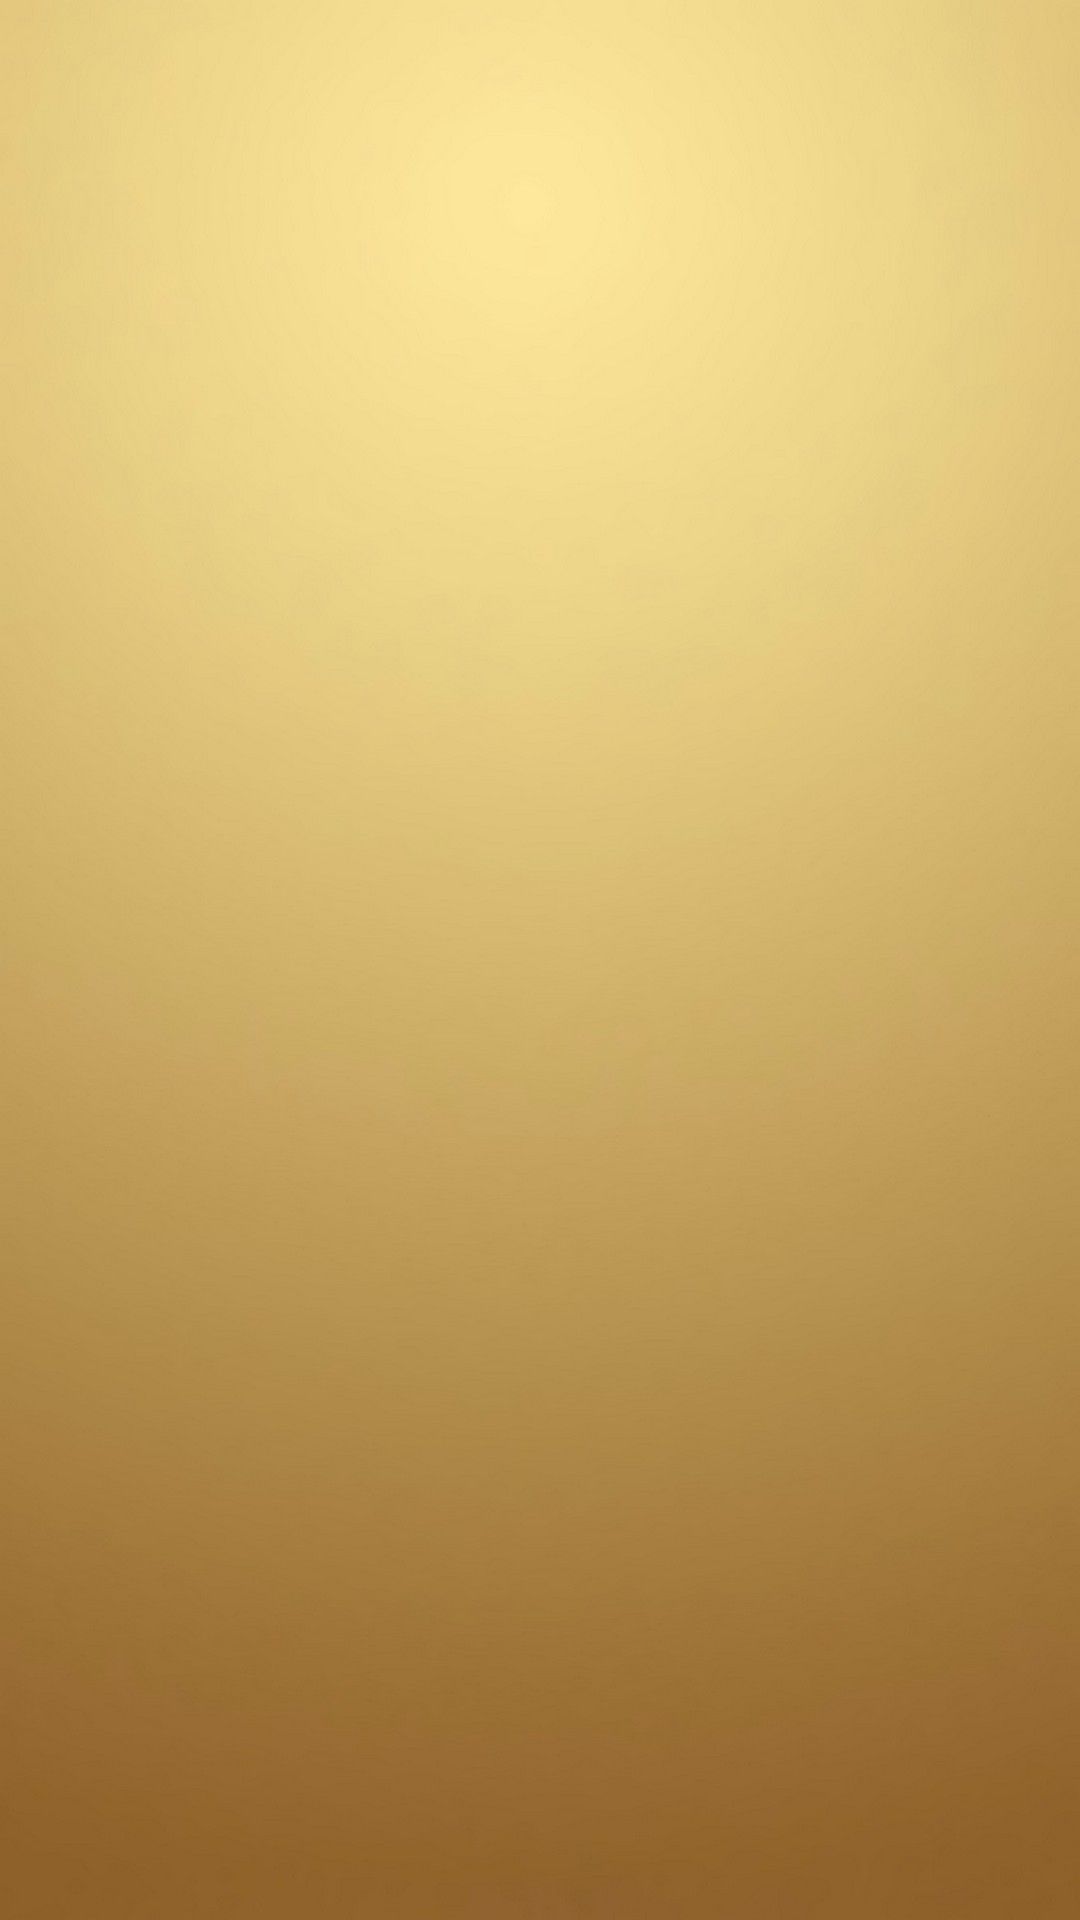 Stock Gold Gradient iPhone Wallpapers on